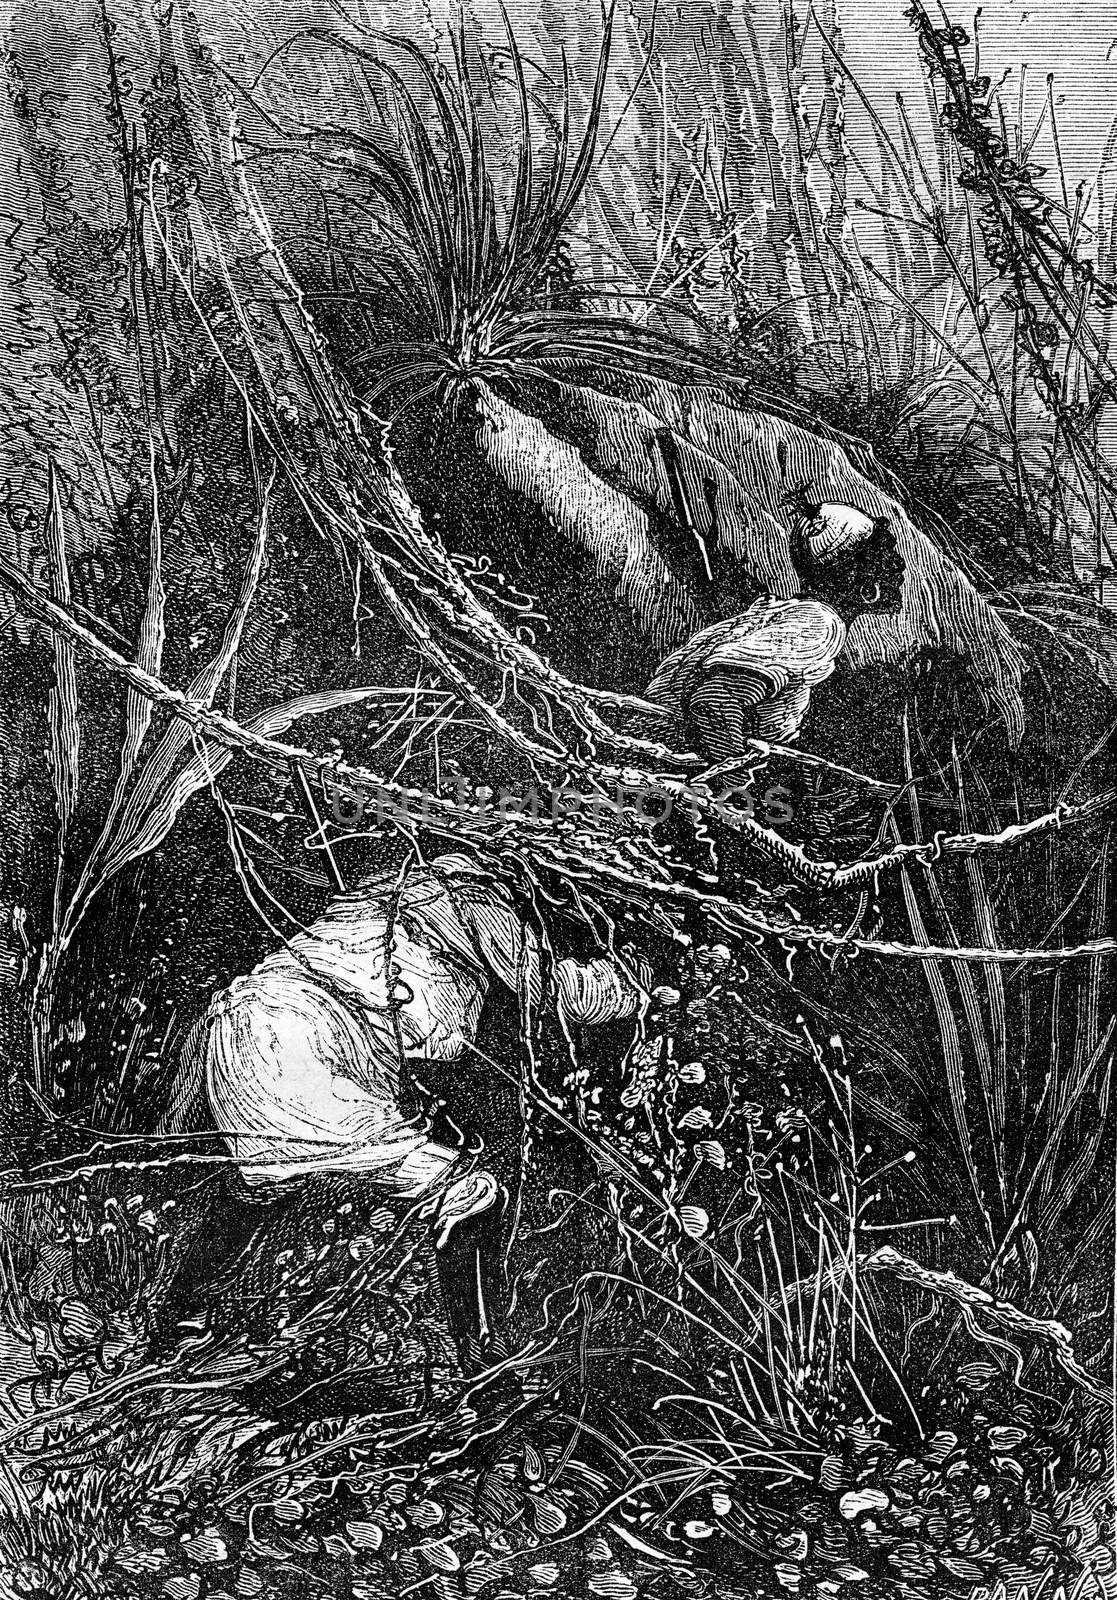 Bushman and Sir John slipped under the bushes, vintage engraving by Morphart